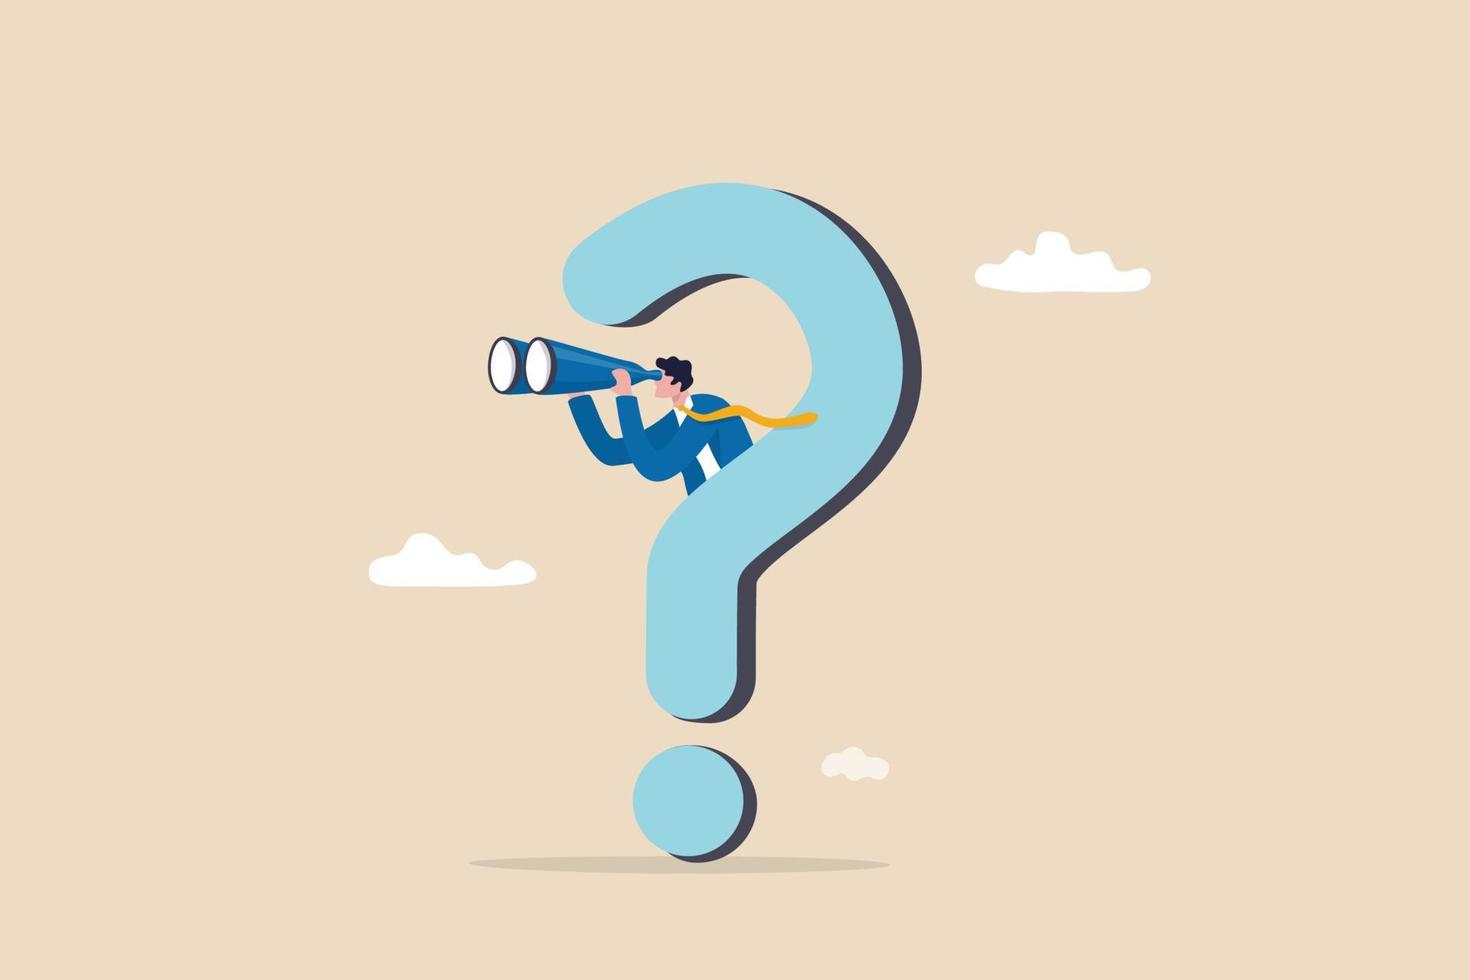 Curiosity explore unknown, search for solution or new business opportunity, seek for success concept, curios businessman with huge question mark look through binoculars to search for new business idea vector